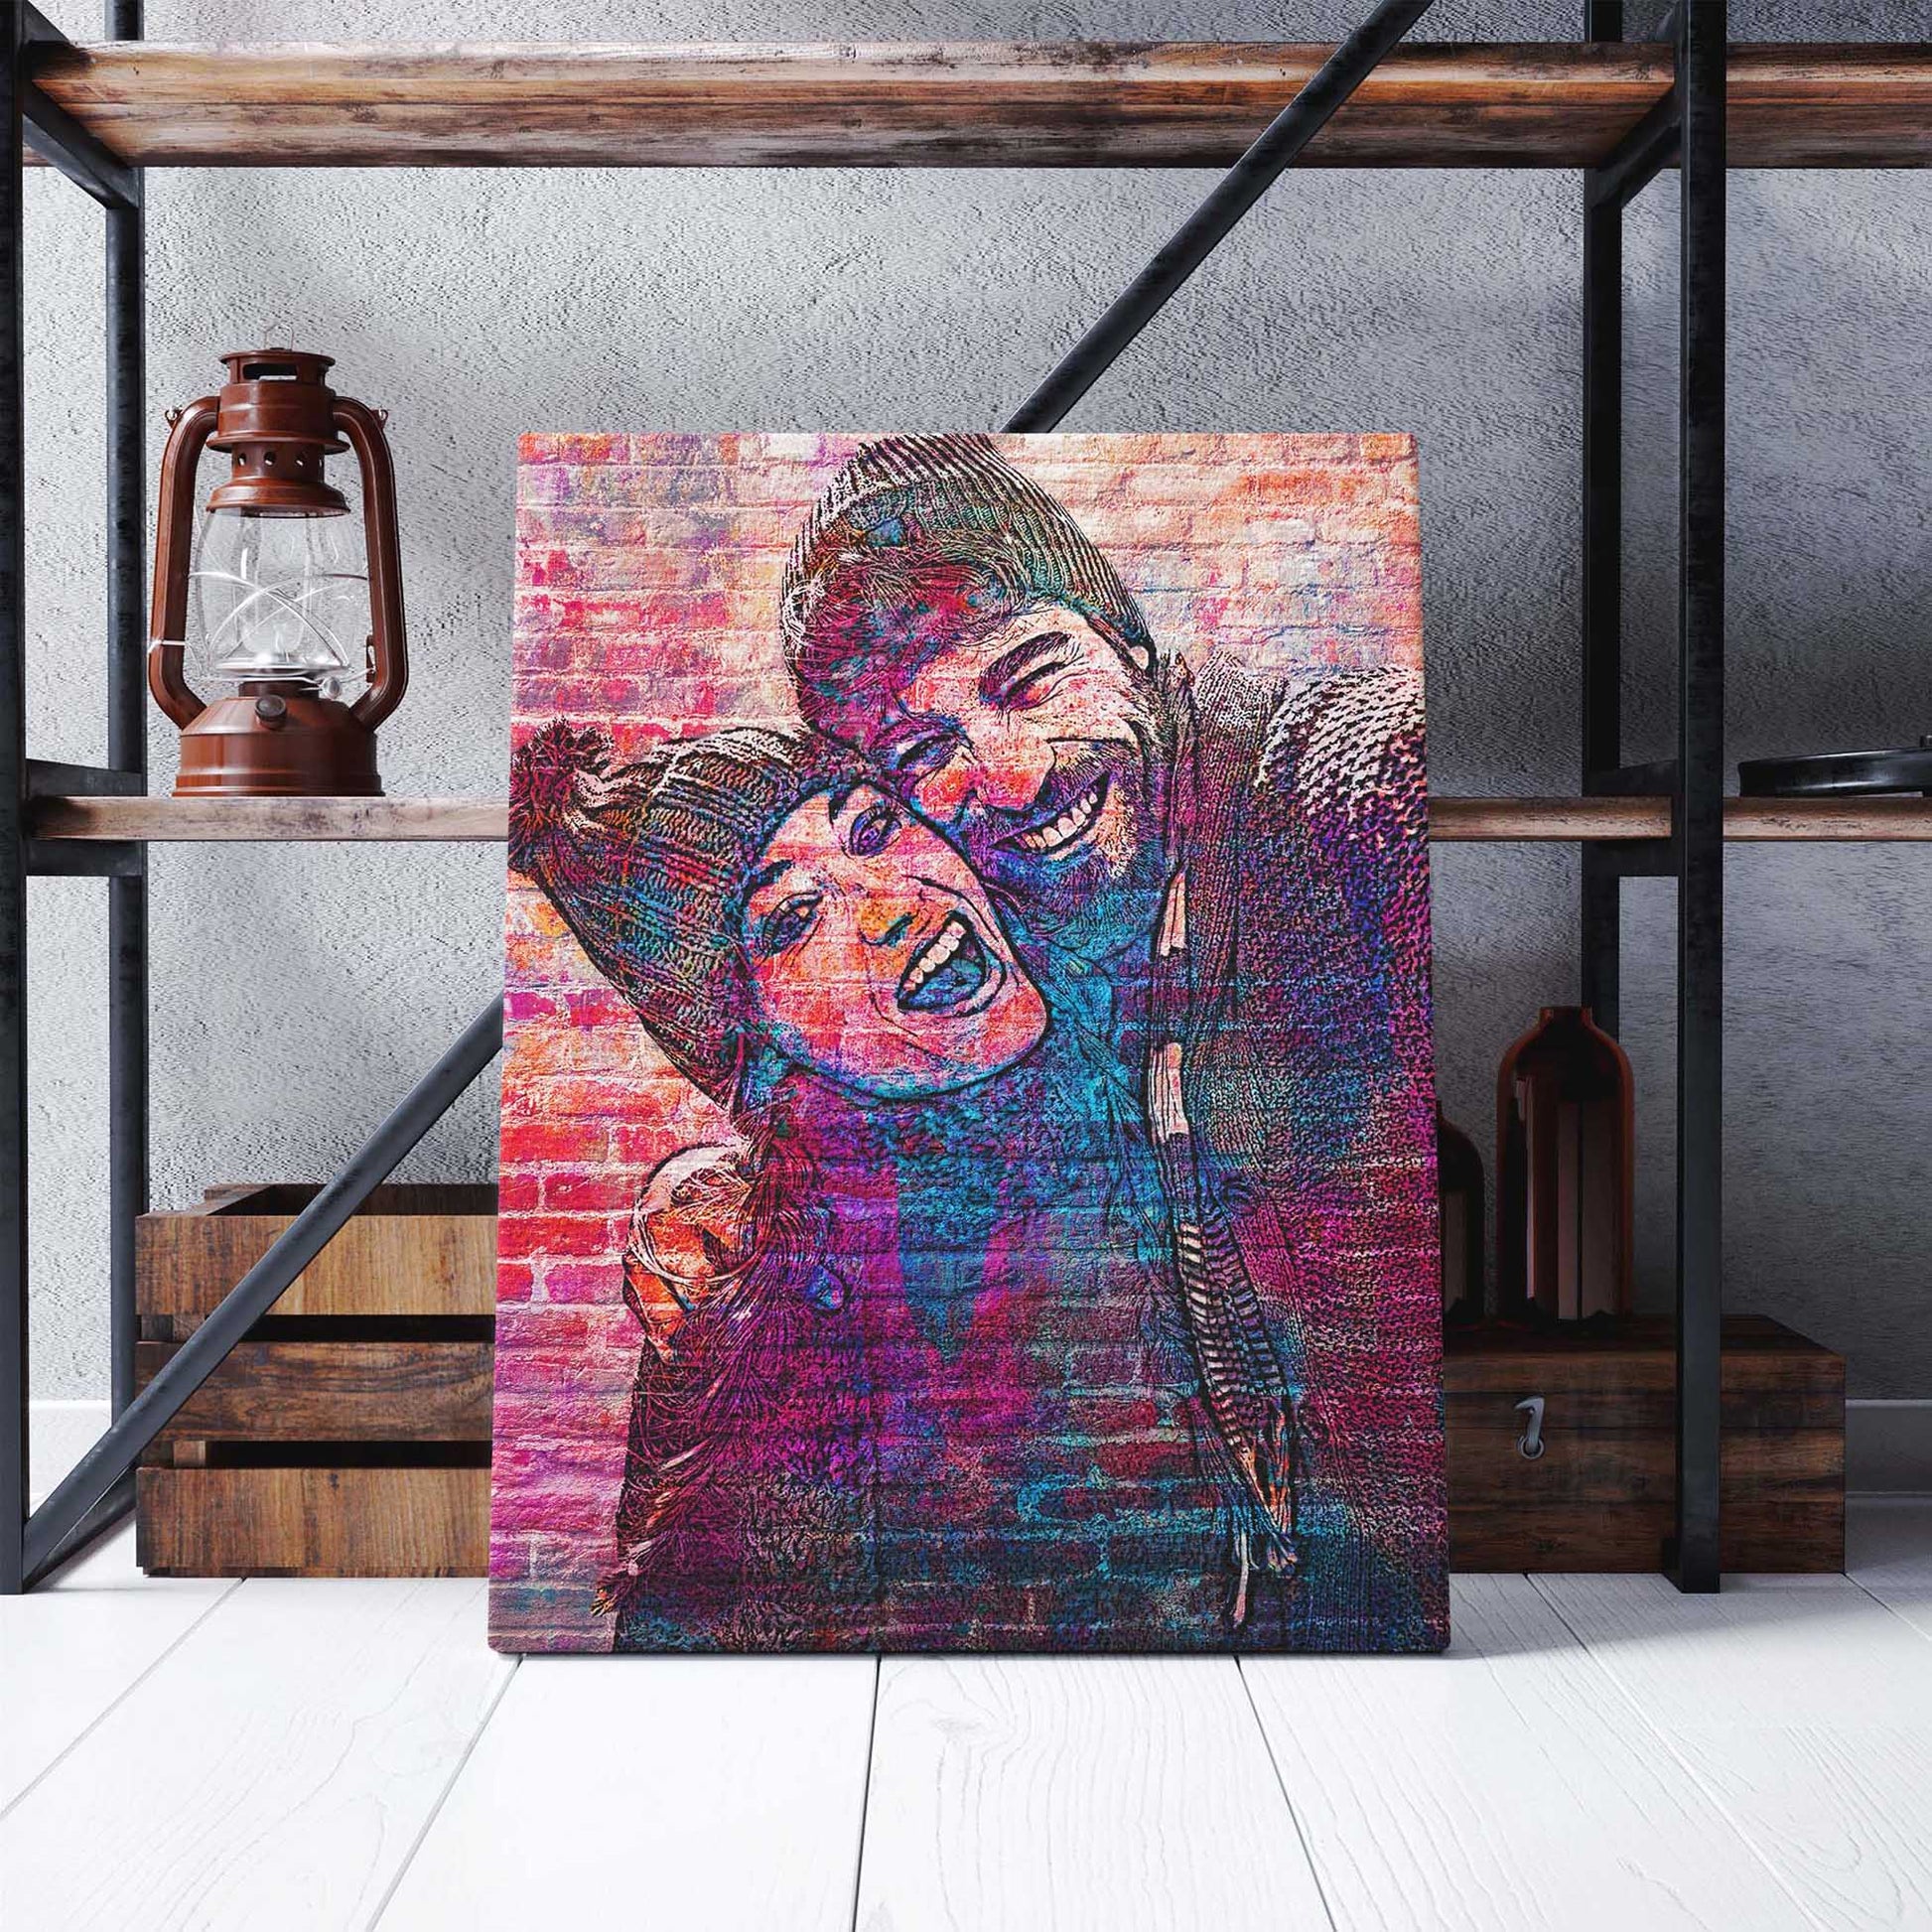 Personalised Brick Graffiti Street Art Canvas - Capture the essence of urban culture with this unique wall art. The graffiti-inspired design on a brick canvas brings a touch of artistic flair to your home